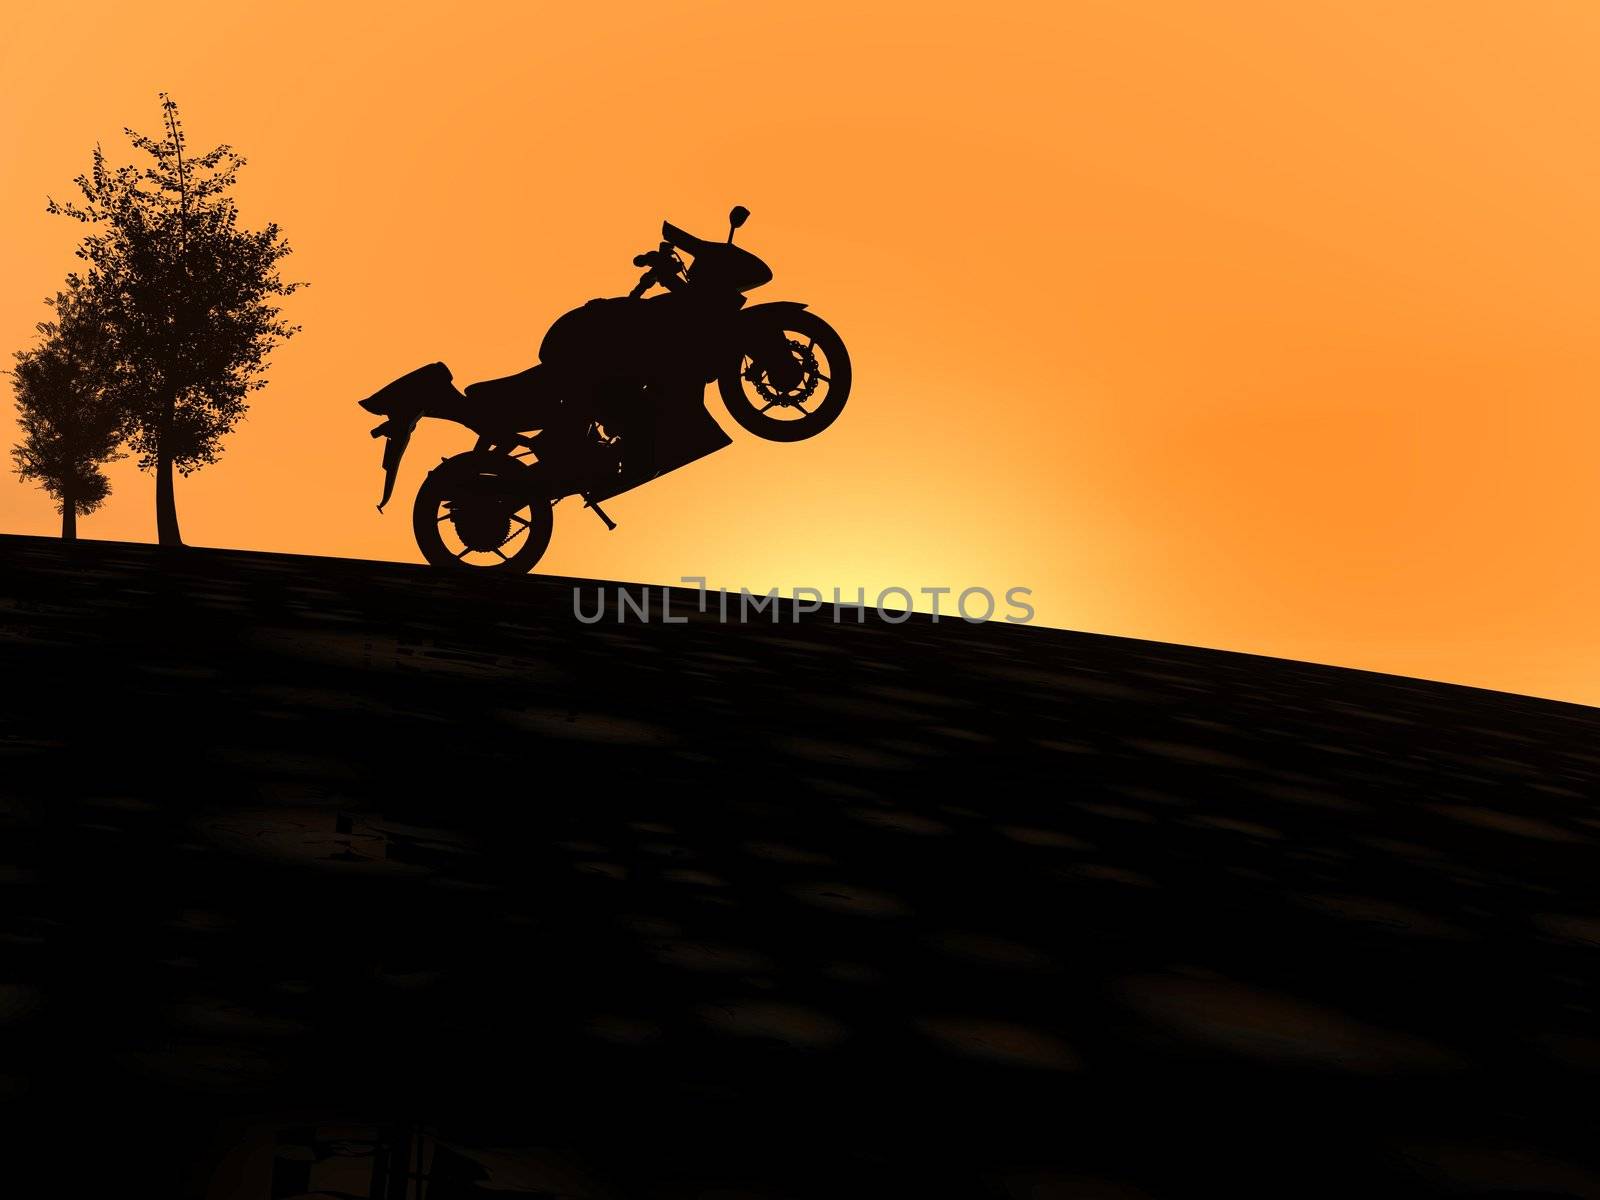 Motorbike shadow by sunset by Elenaphotos21